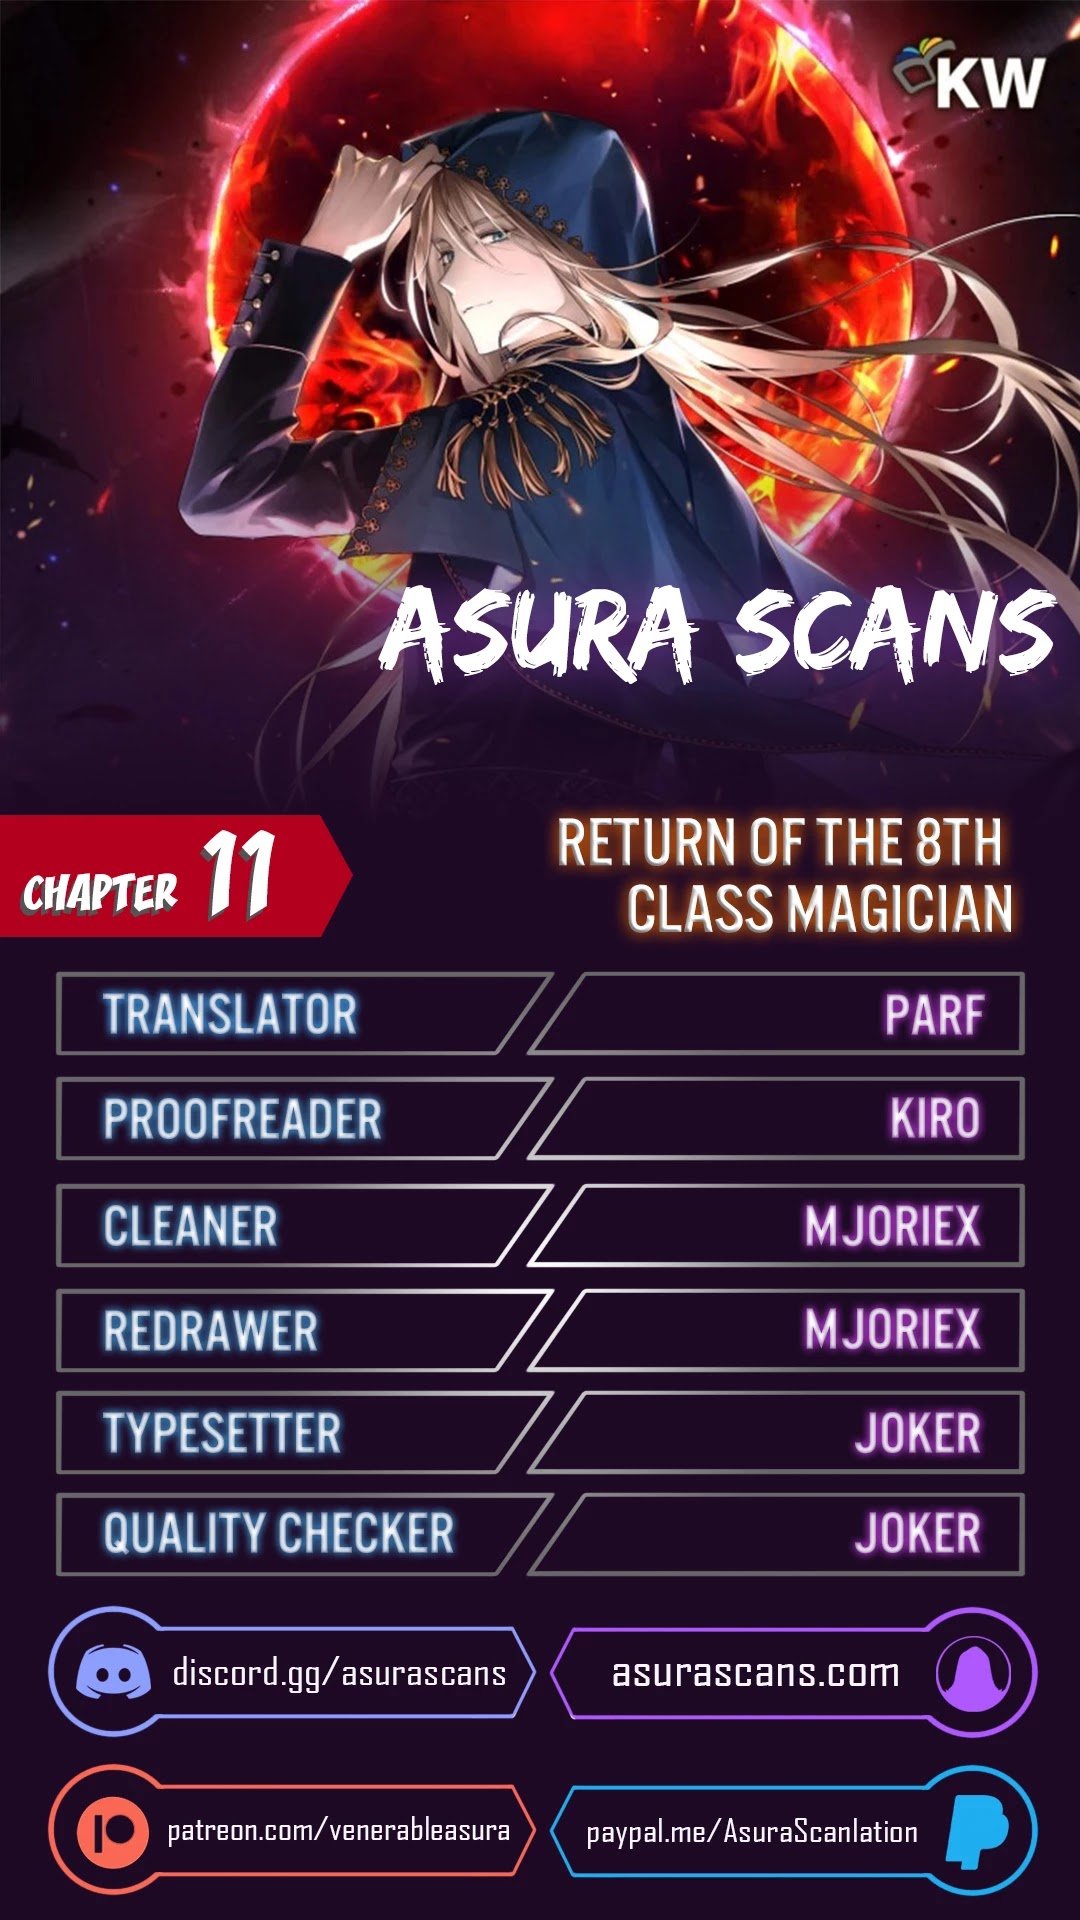 Return of the 8th class Magician chapter 11